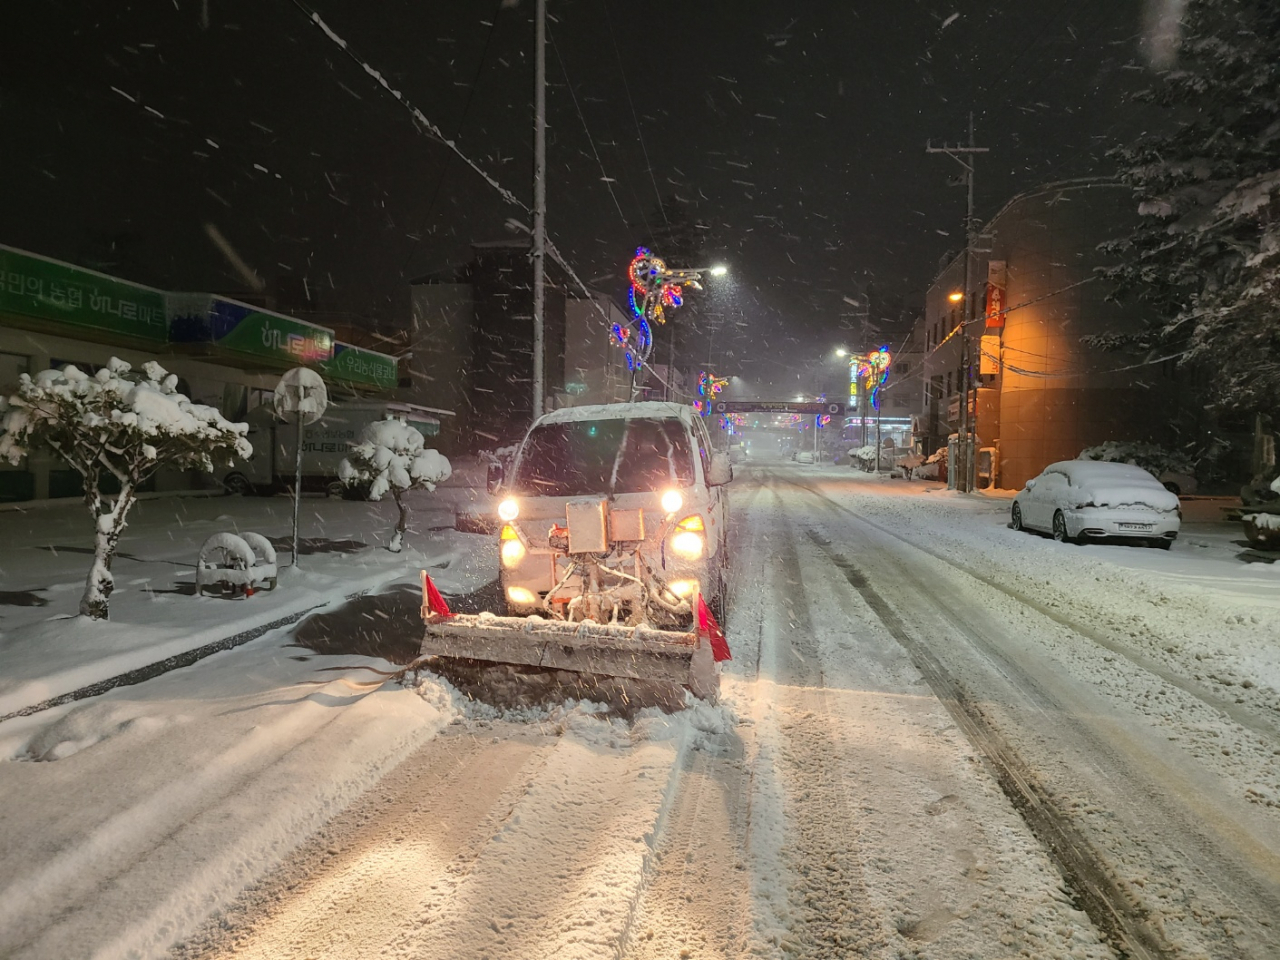 After nearly 18 centimeters of snow fell in Chungju, North Chungcheong Province, snow removal trucks took to the streets early Wednesday. Chungju deployed 20 snow removal vehicles overnight and issued an emergency order for public officials in the morning to clear snow that had accumulated on city roads and alleys. (Yonhap)